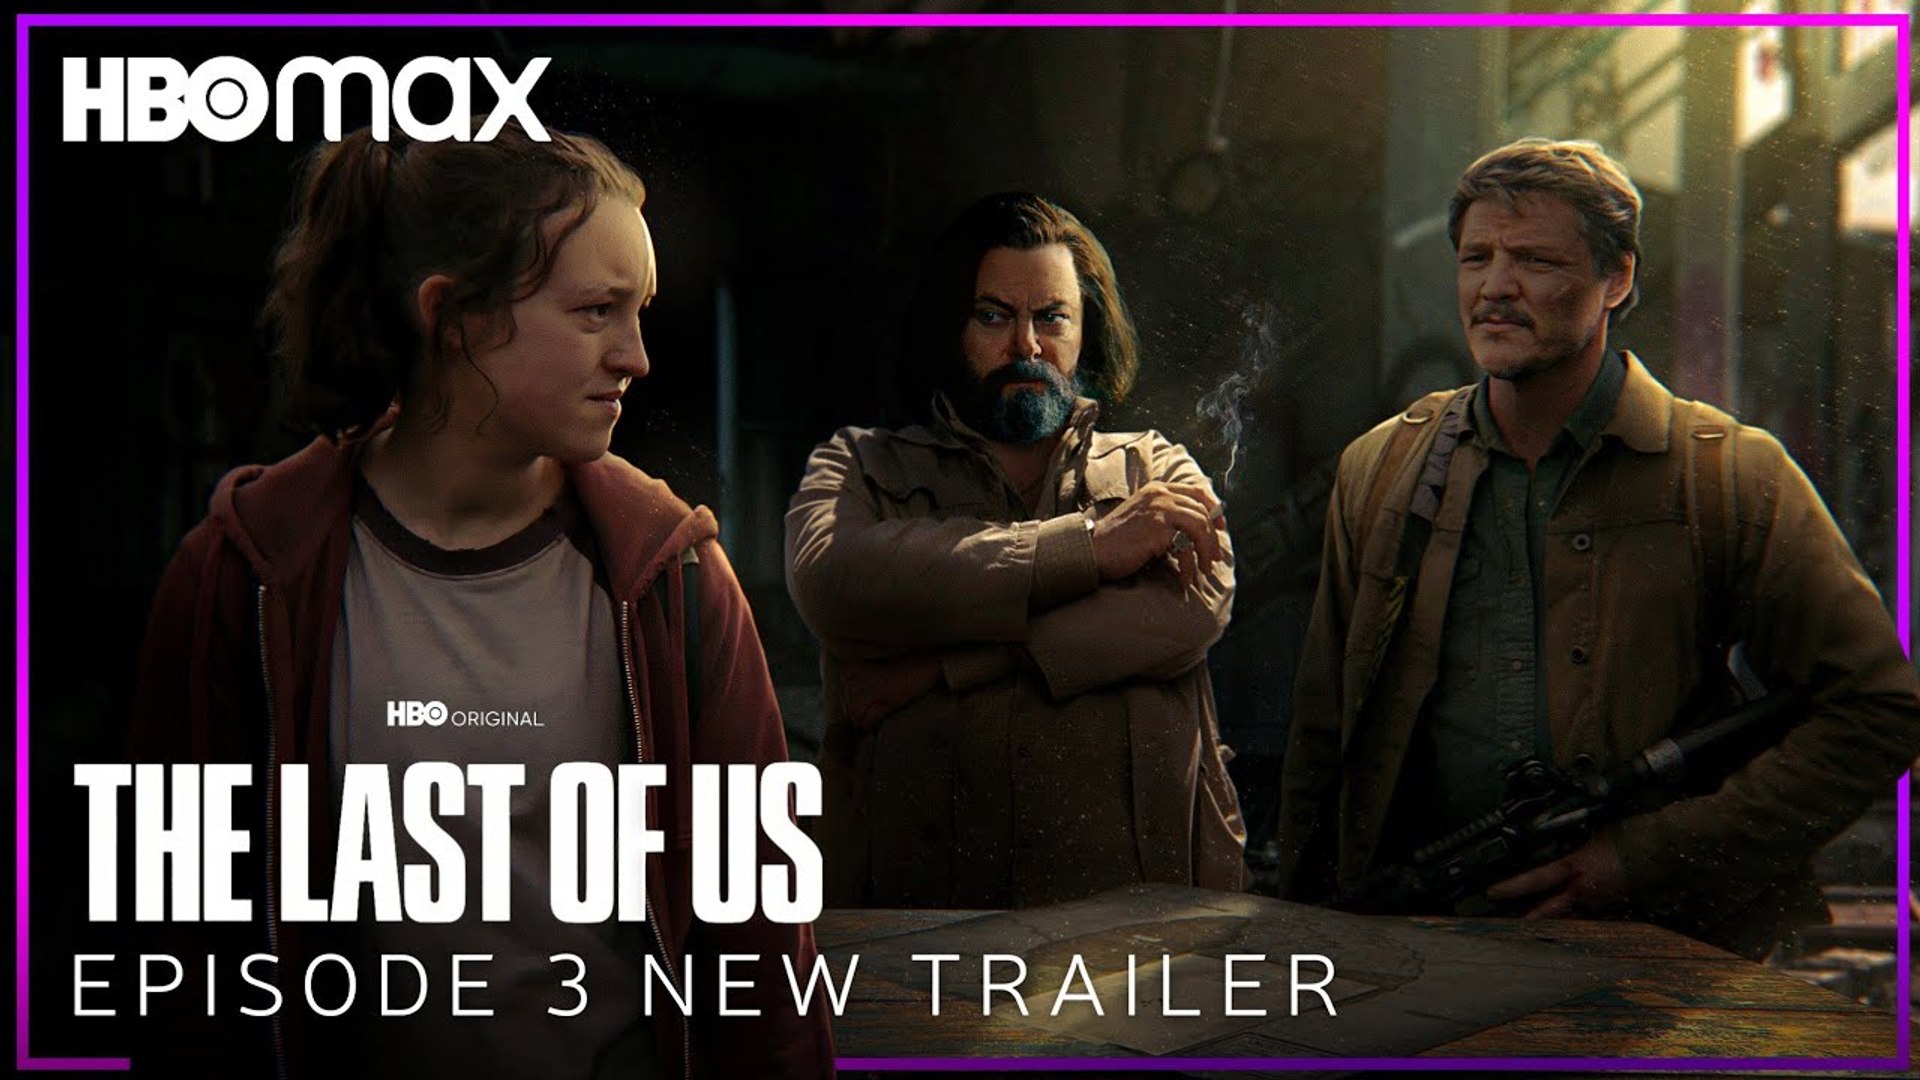 The Last of Us EPISODE 3 NEW TRAILER